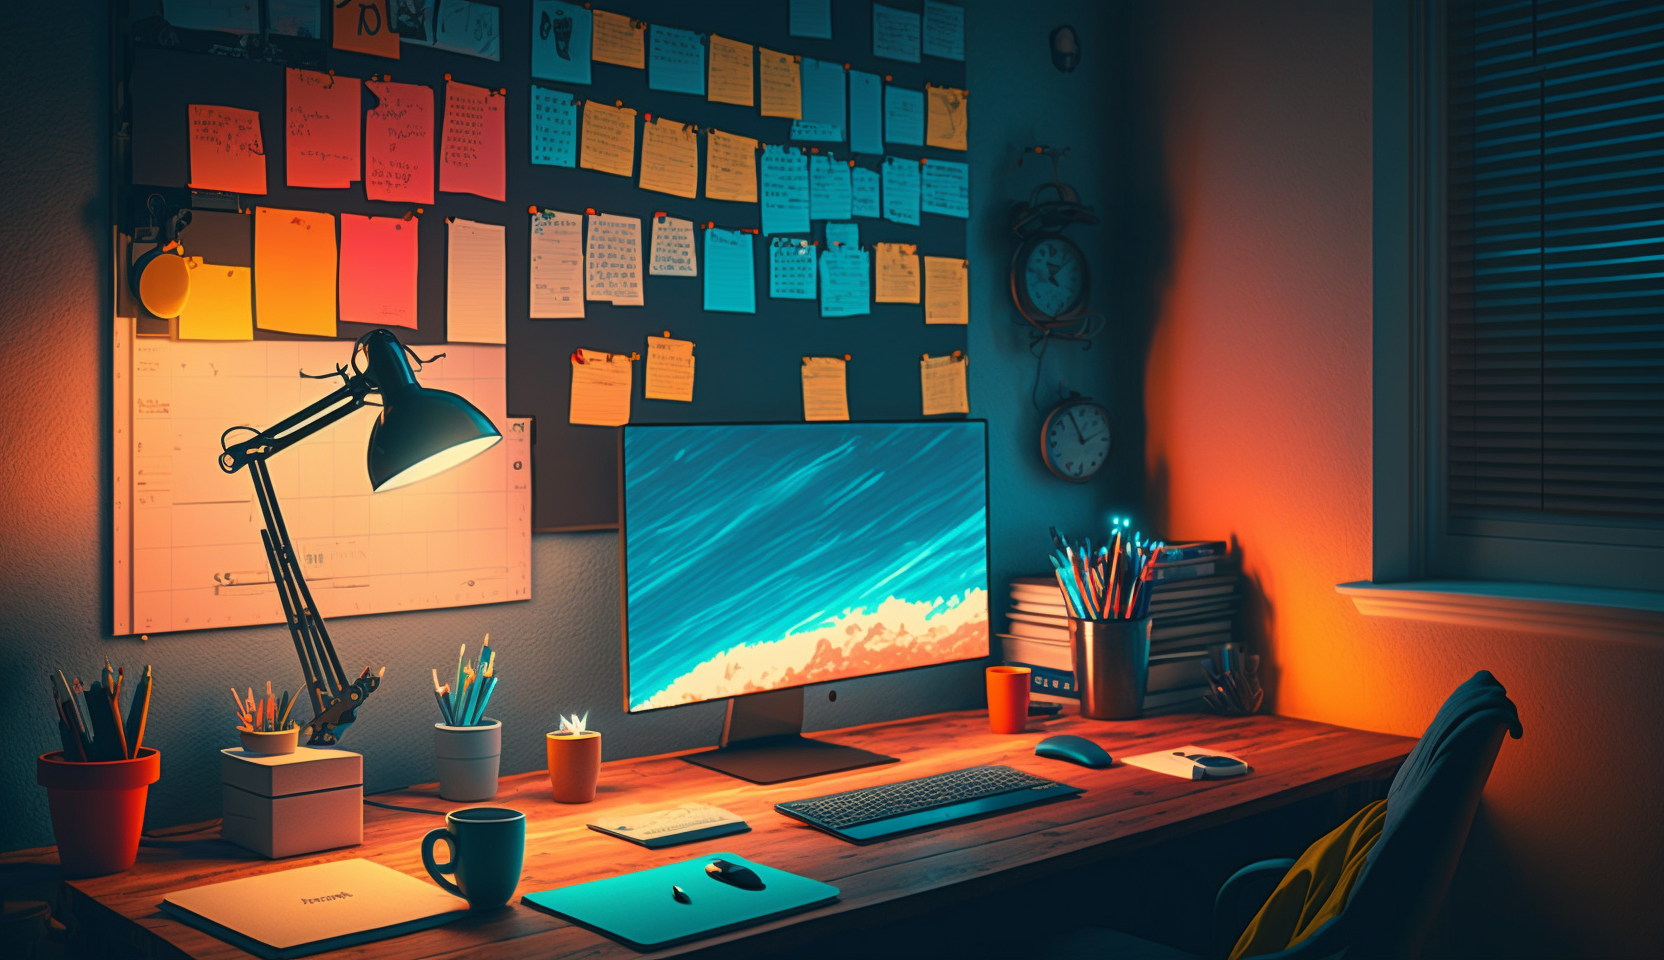 An illustration of a product developer's workstation with lamp, display, and lots of post-it notes